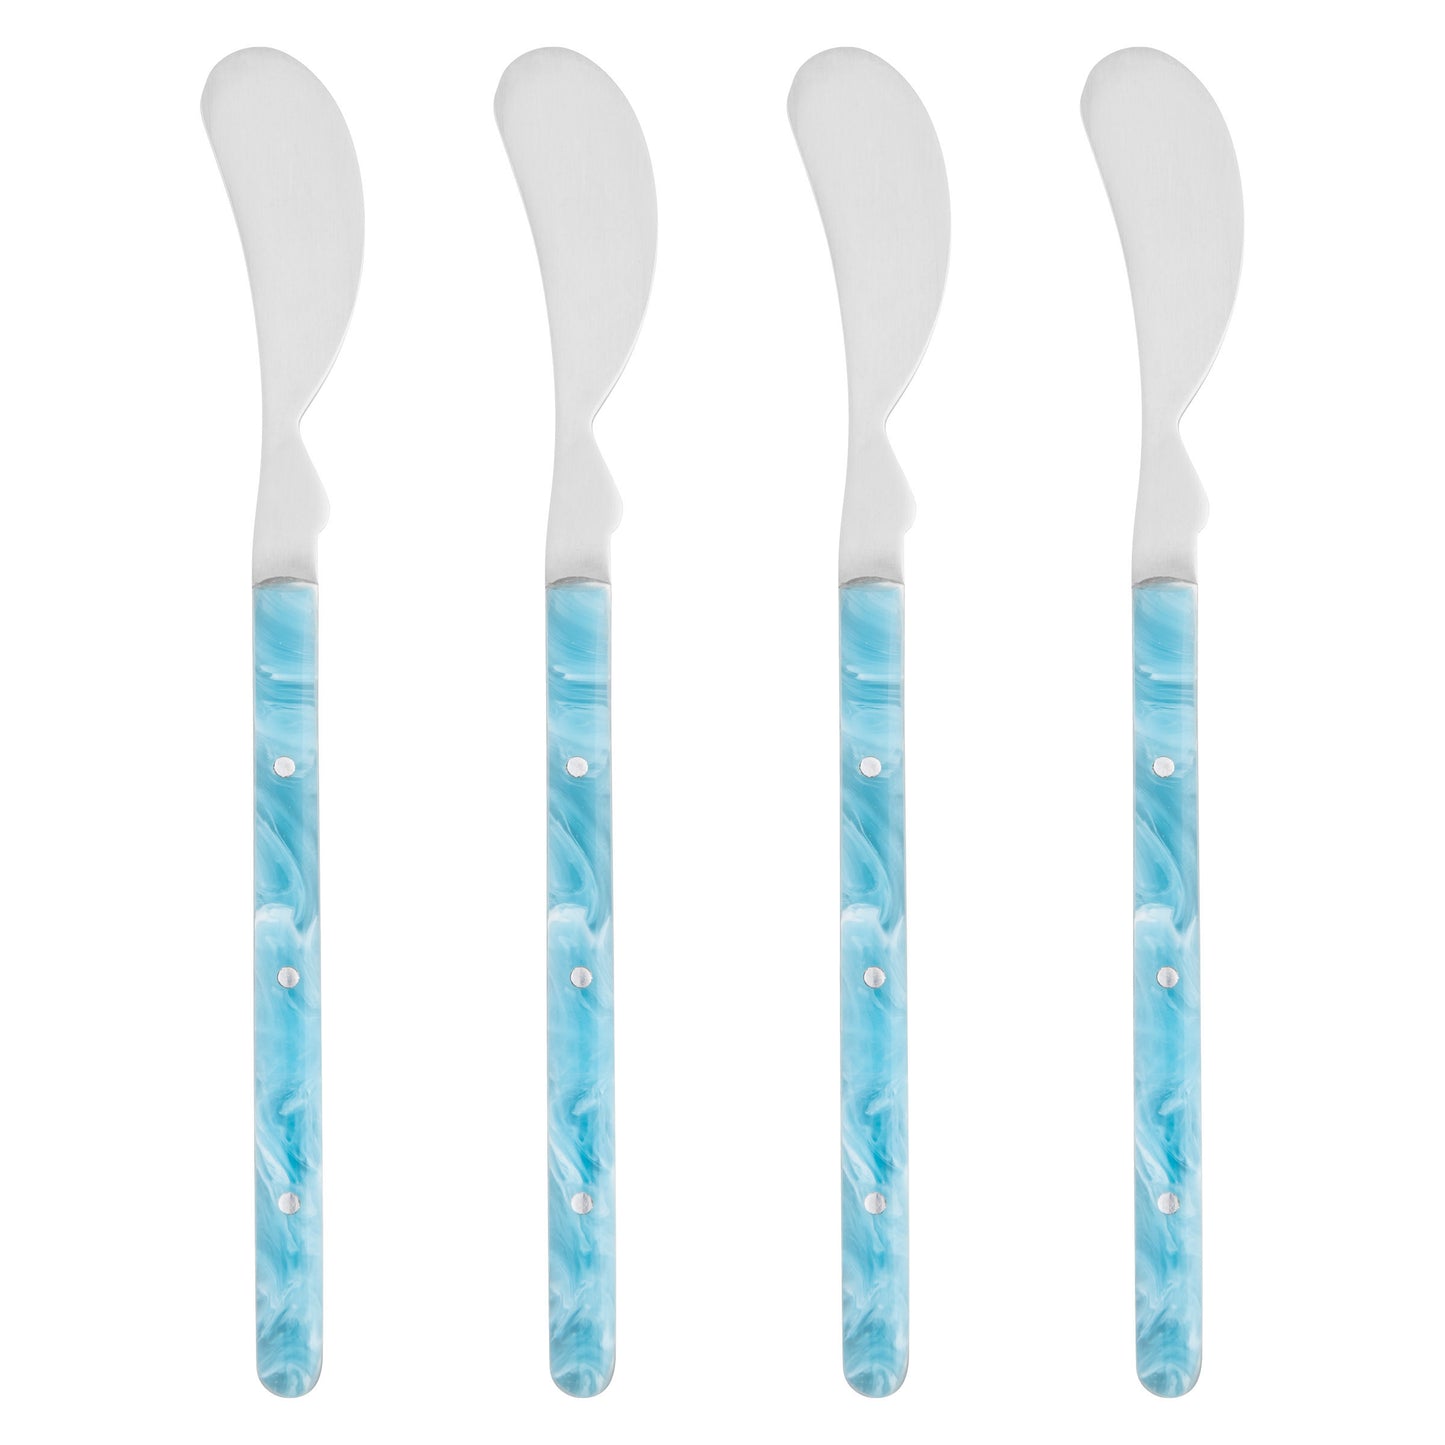 Resin Cheese Spreaders S/4